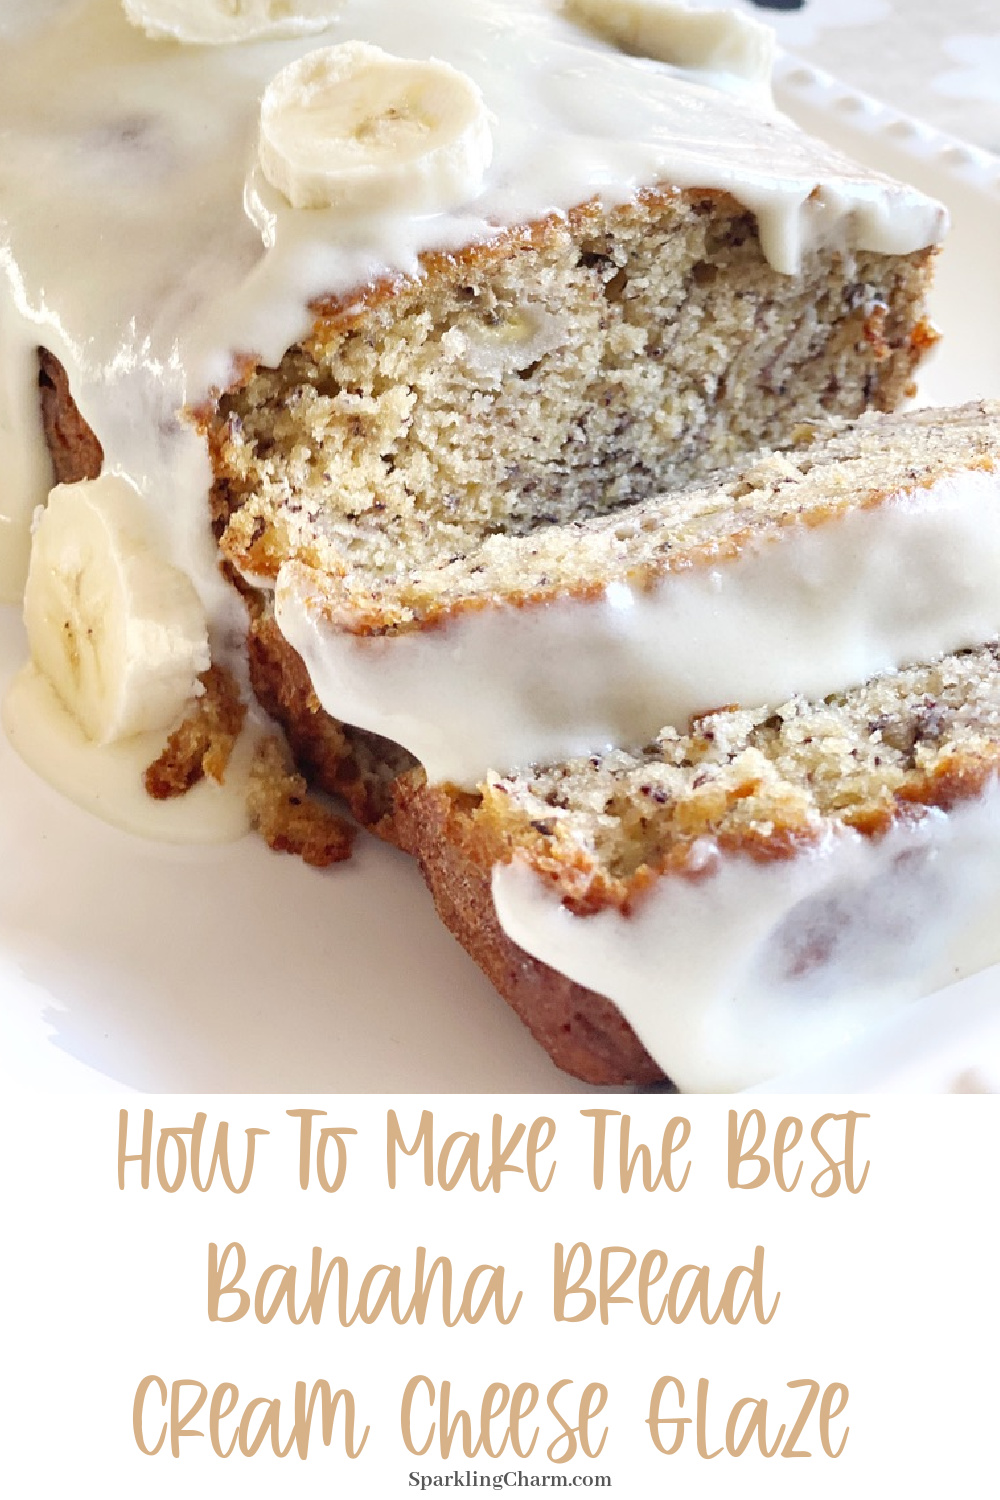 The Best Banana Bread with Cream Cheese Glaze